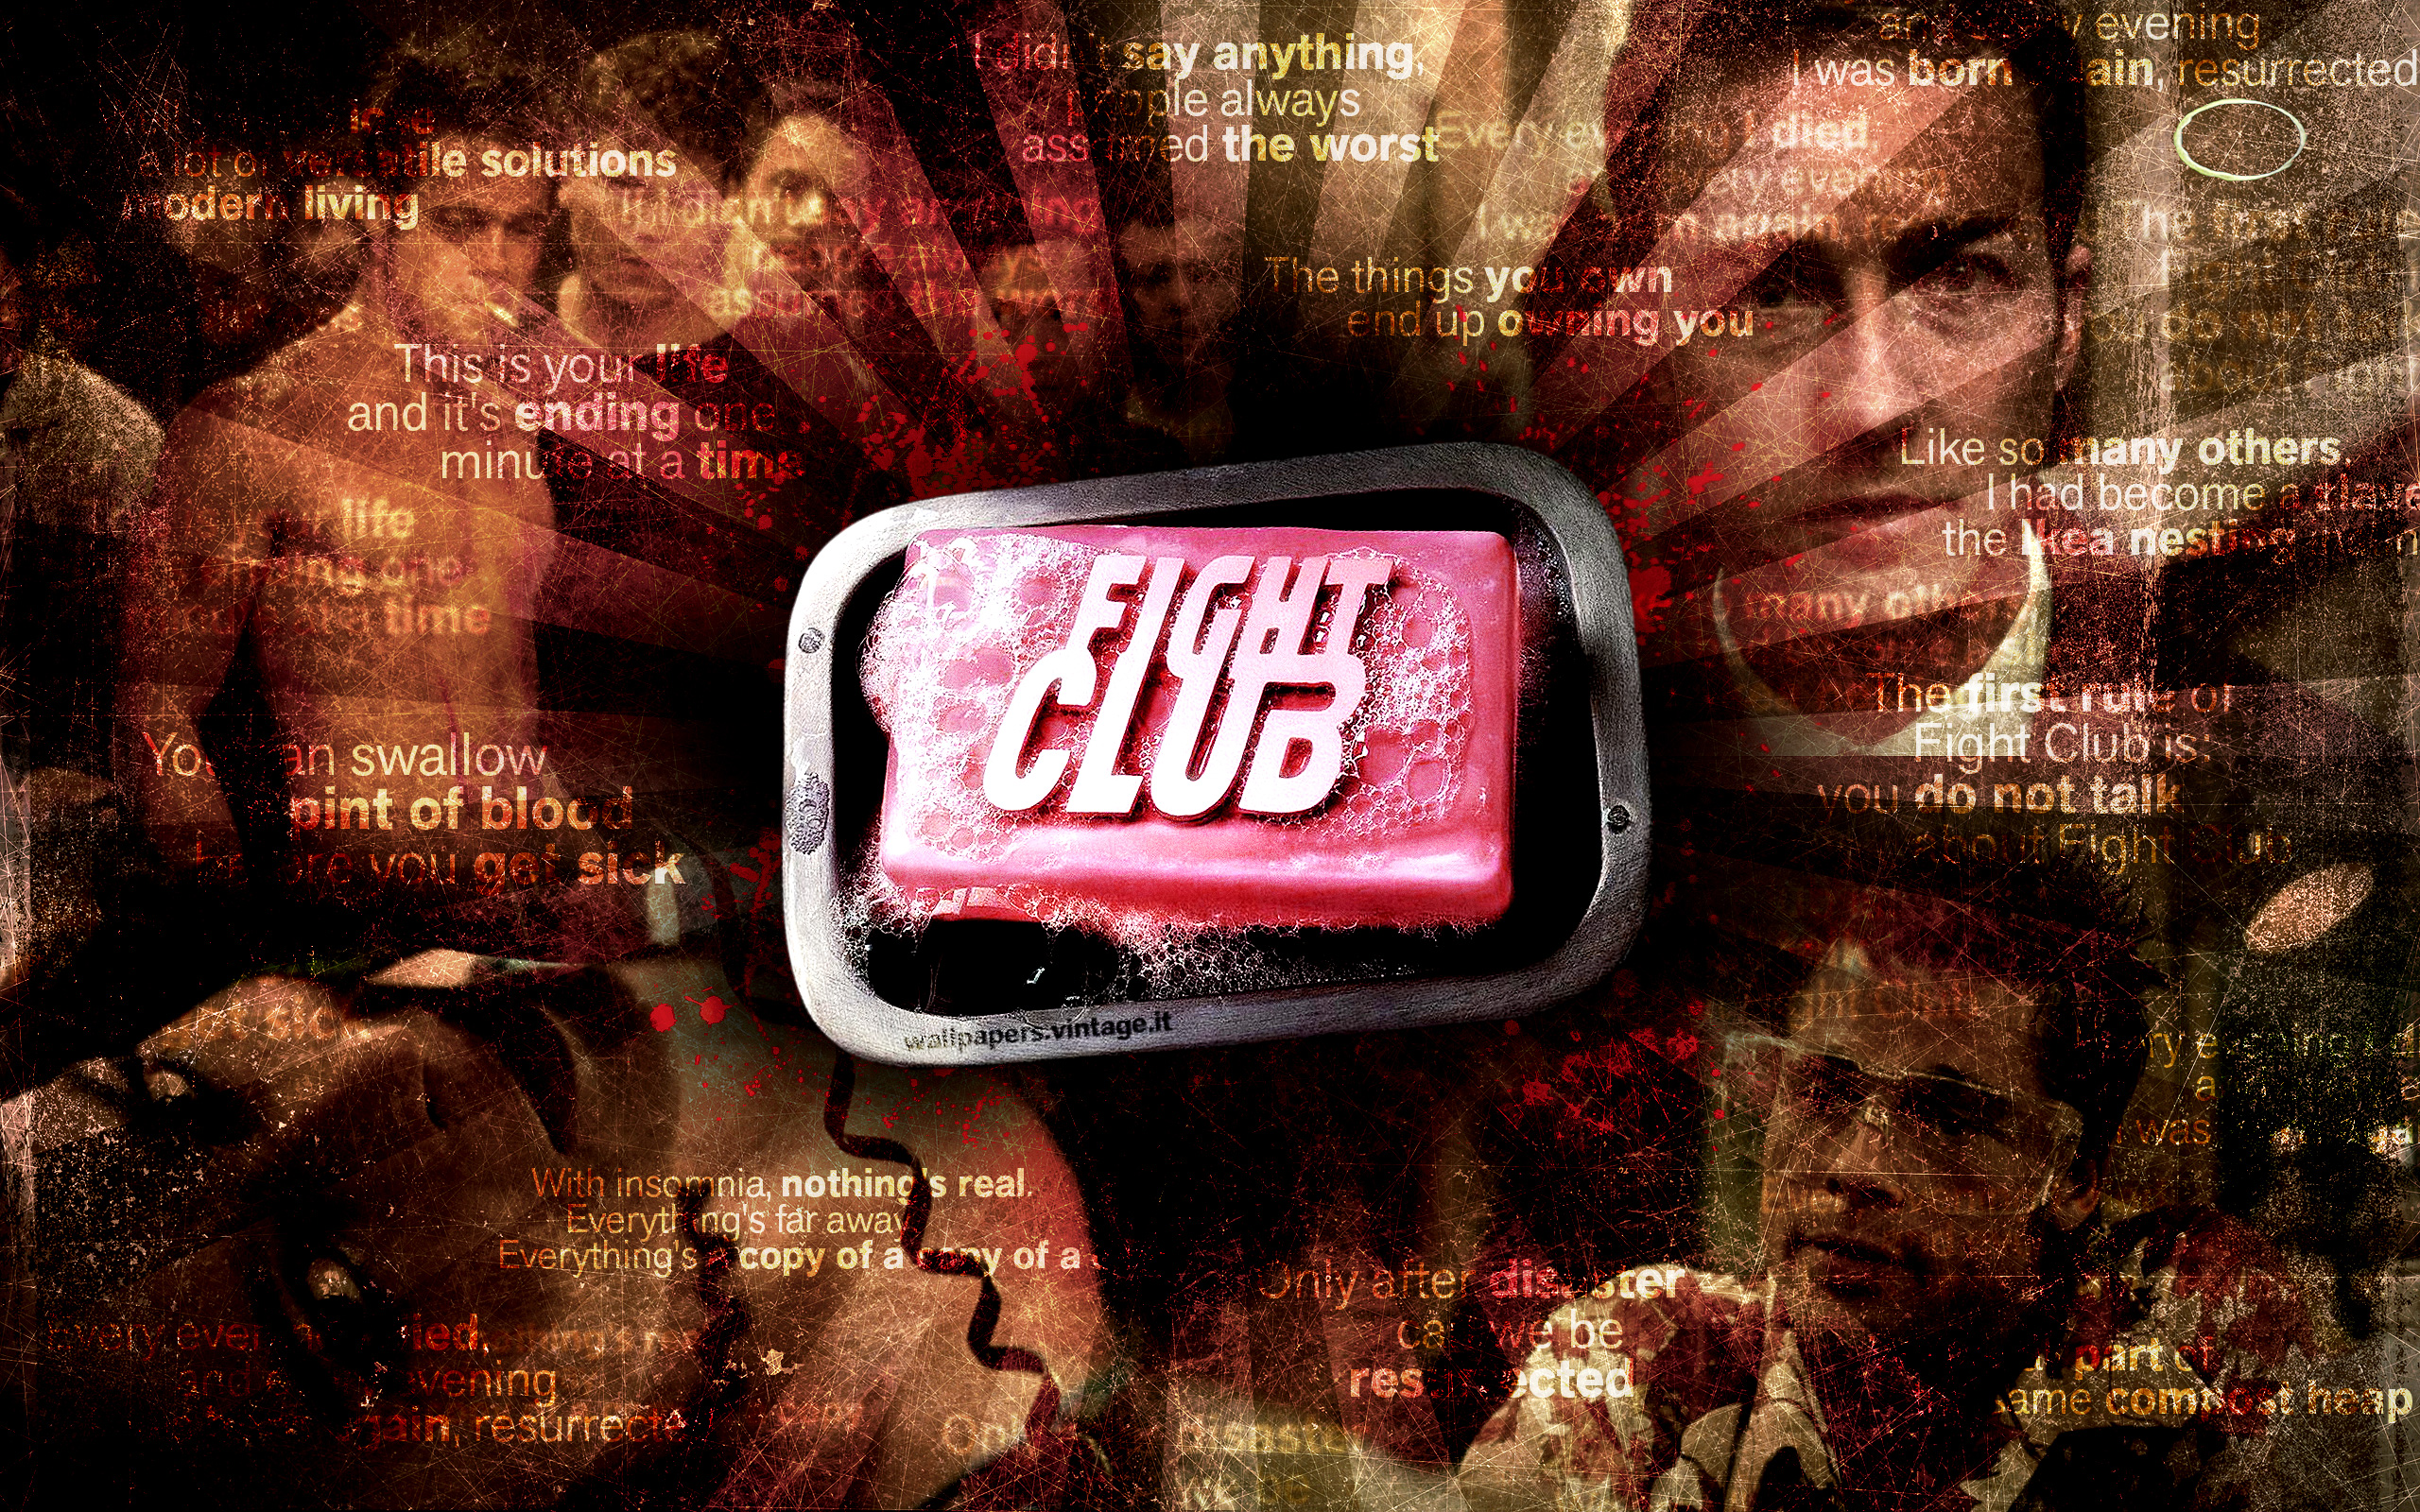 fight club wallpaper iphone,text,font,design,graphic design,games